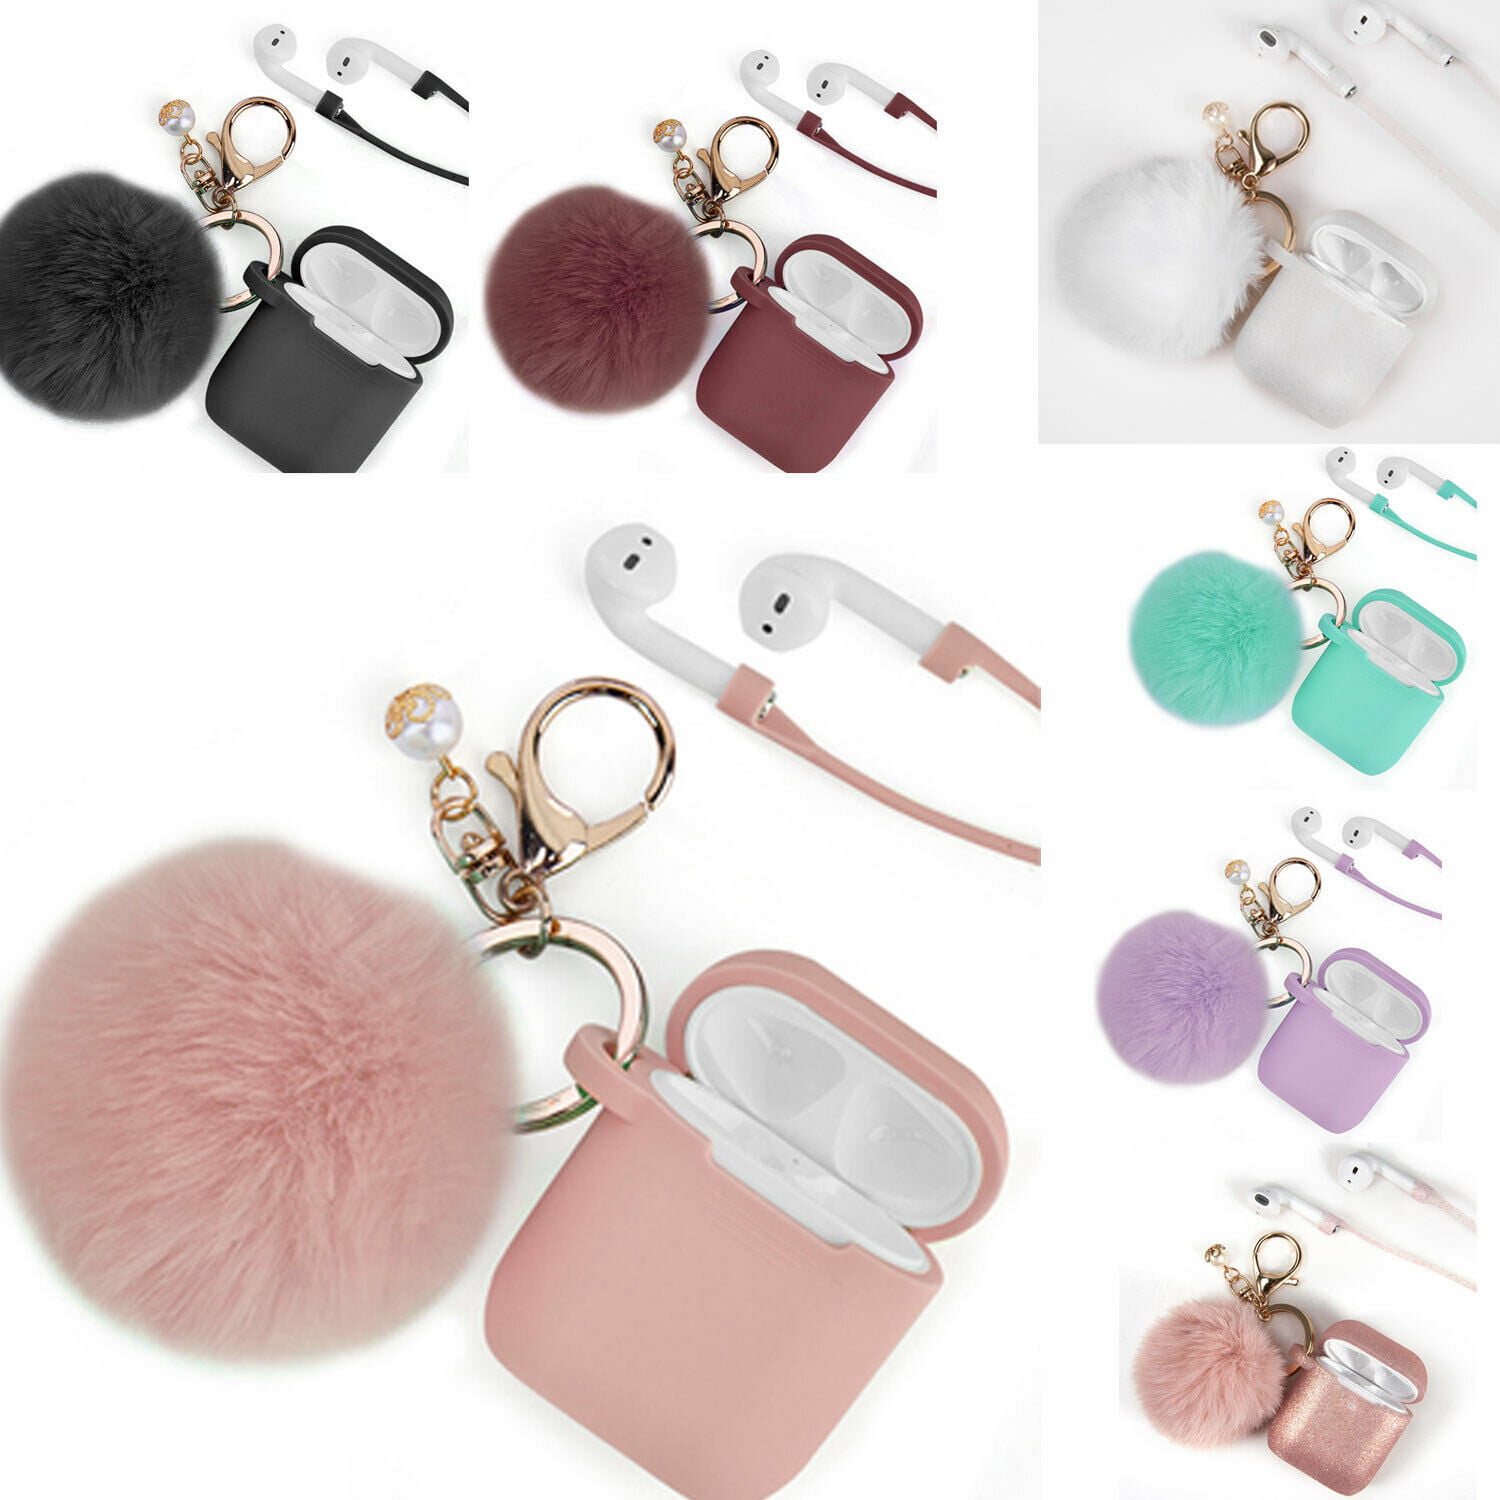 Cute Milk Box Airpod Case Milk Box Silicone AirPods Case with Metal Keychain Apple Earpods for generation 2 Protective Case 1